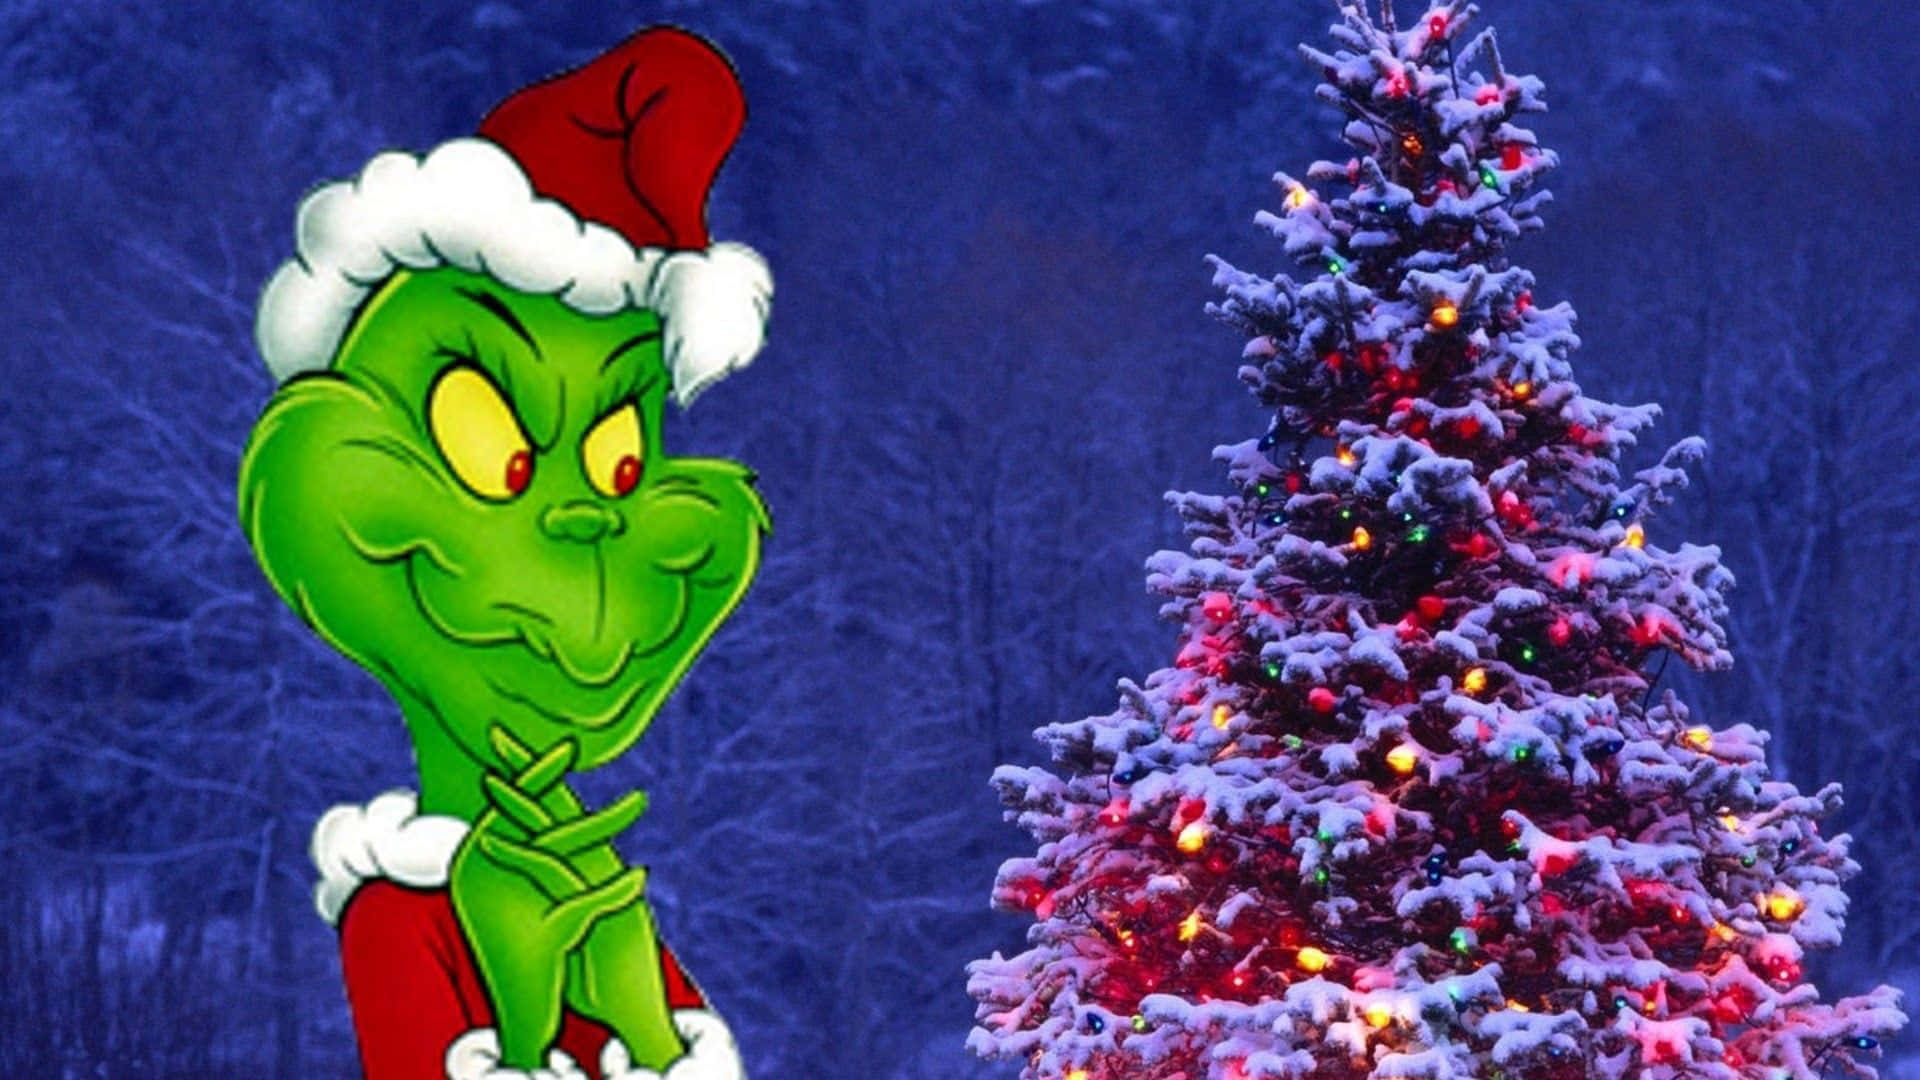 Celebrate Christmas with the Cute Grinch!